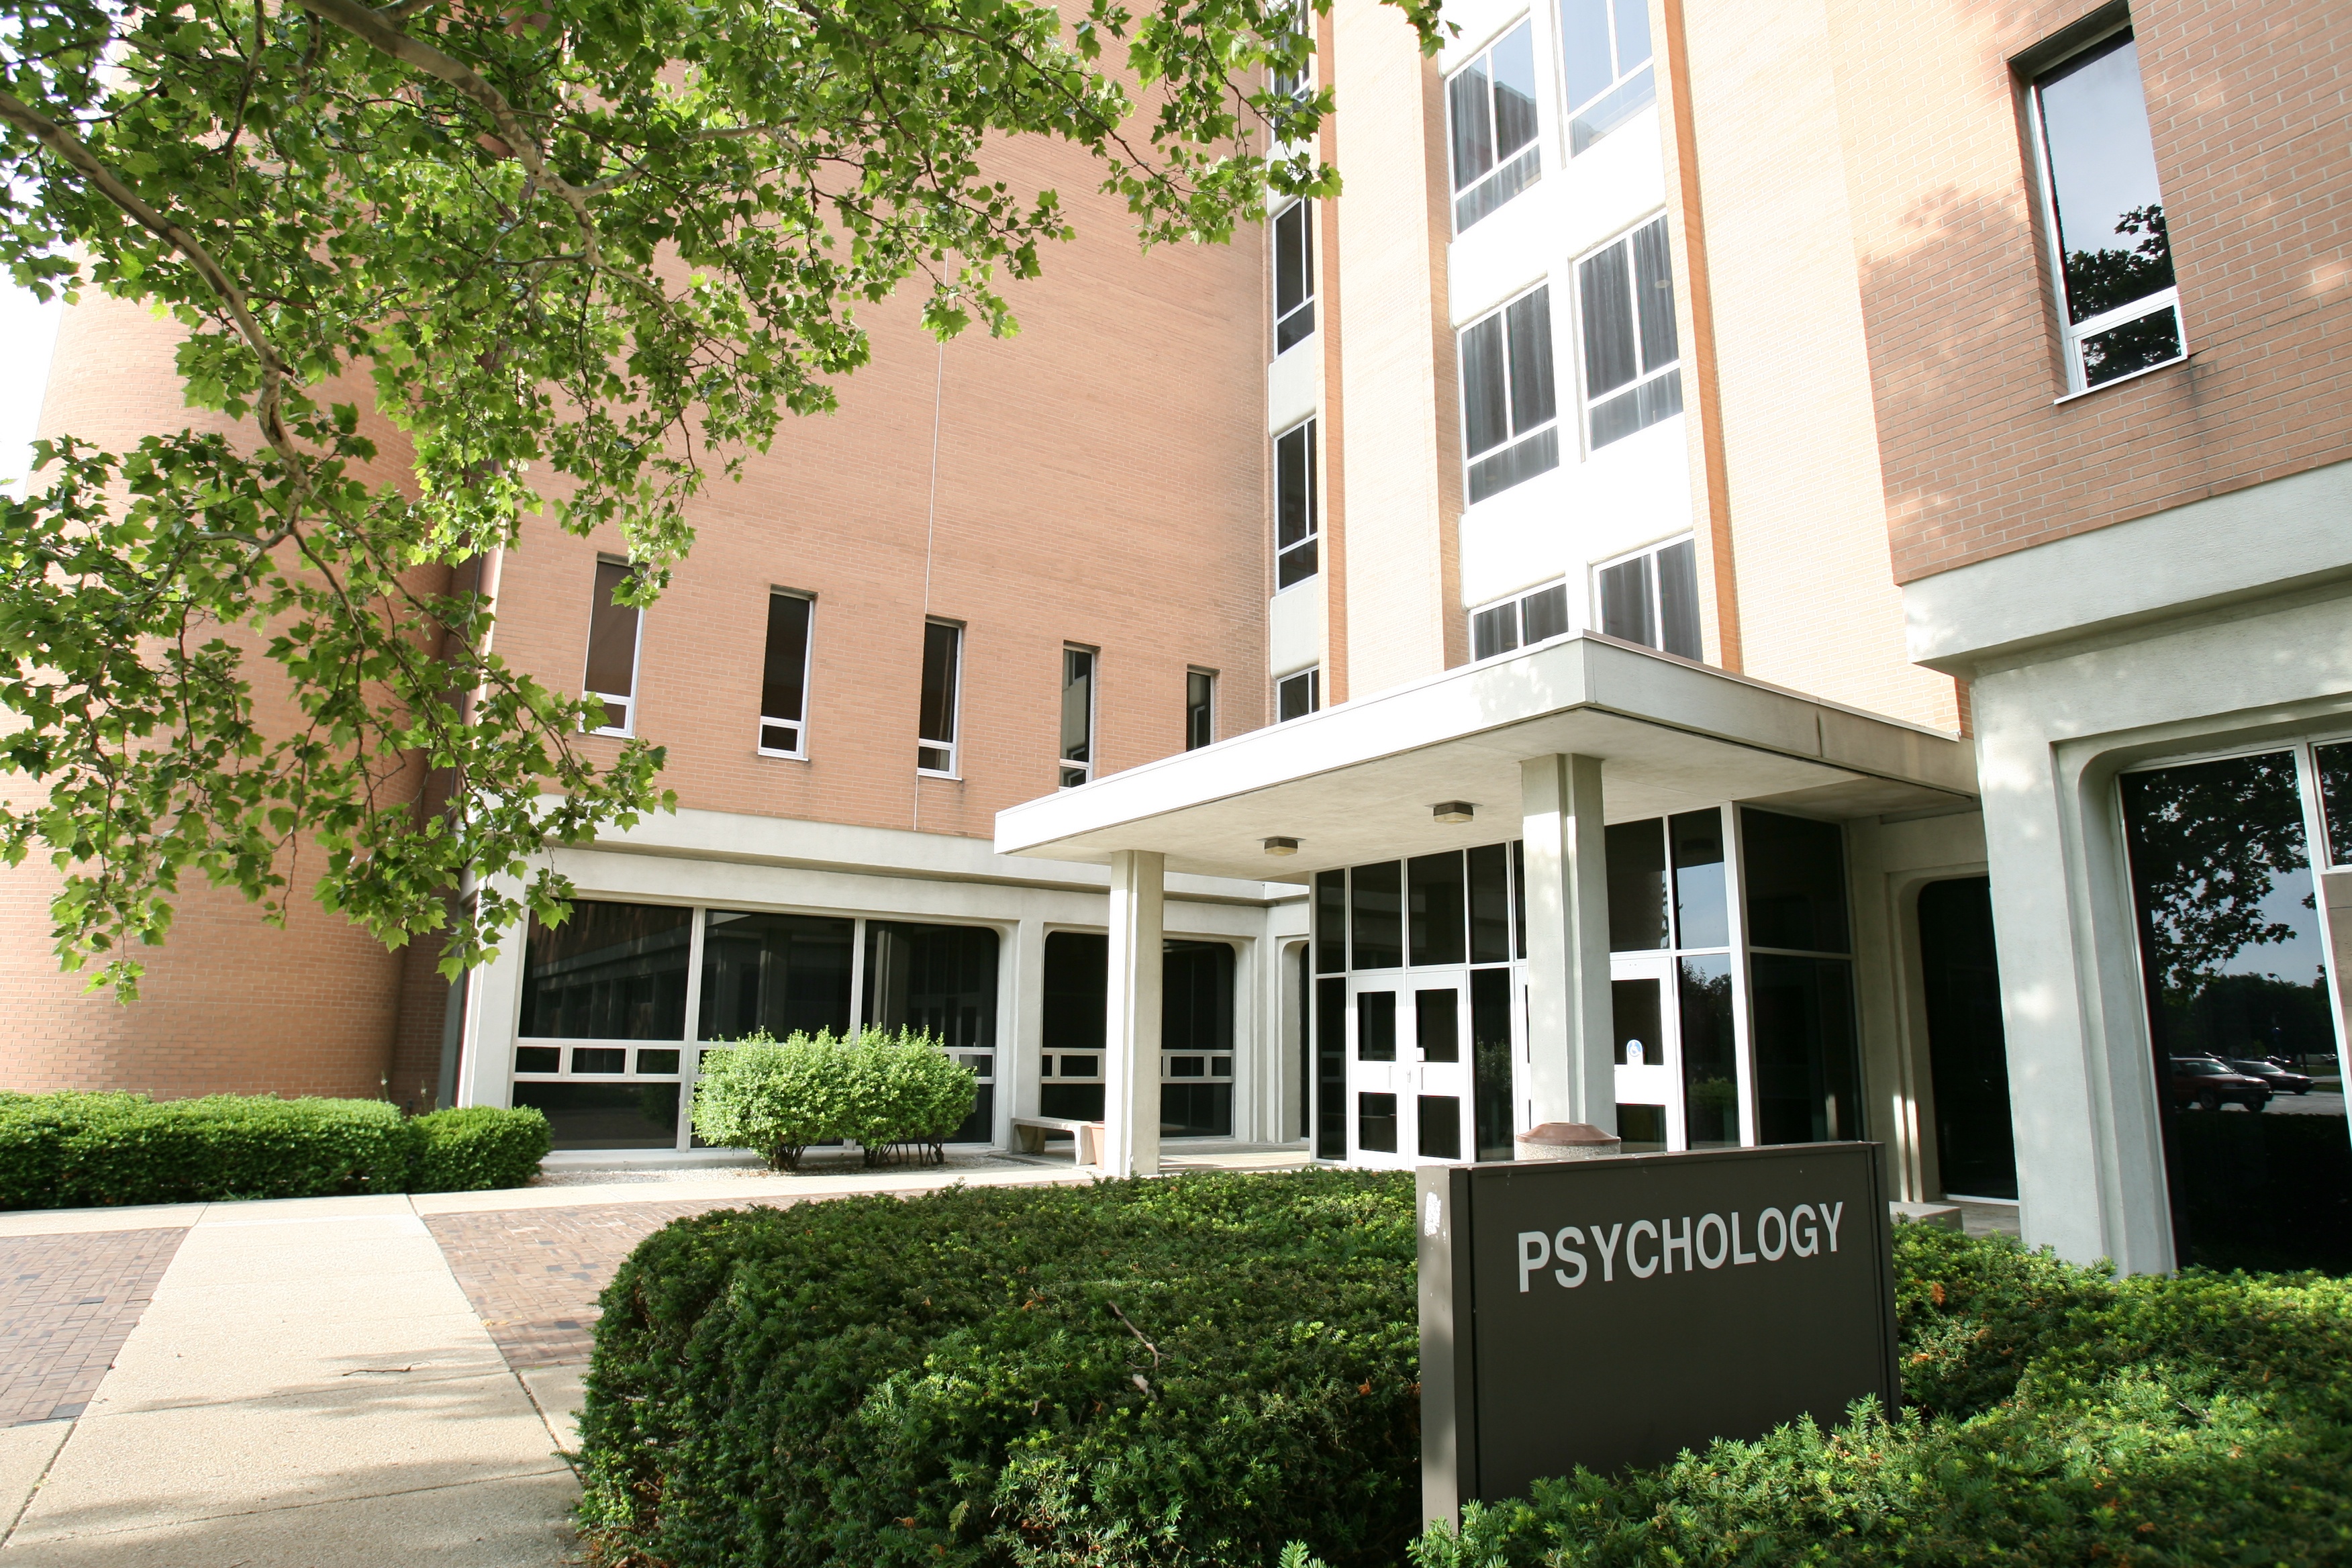 The BGSU I-O Psychology graduate program shares a building with the other psychology disciplines on our Ohio campus